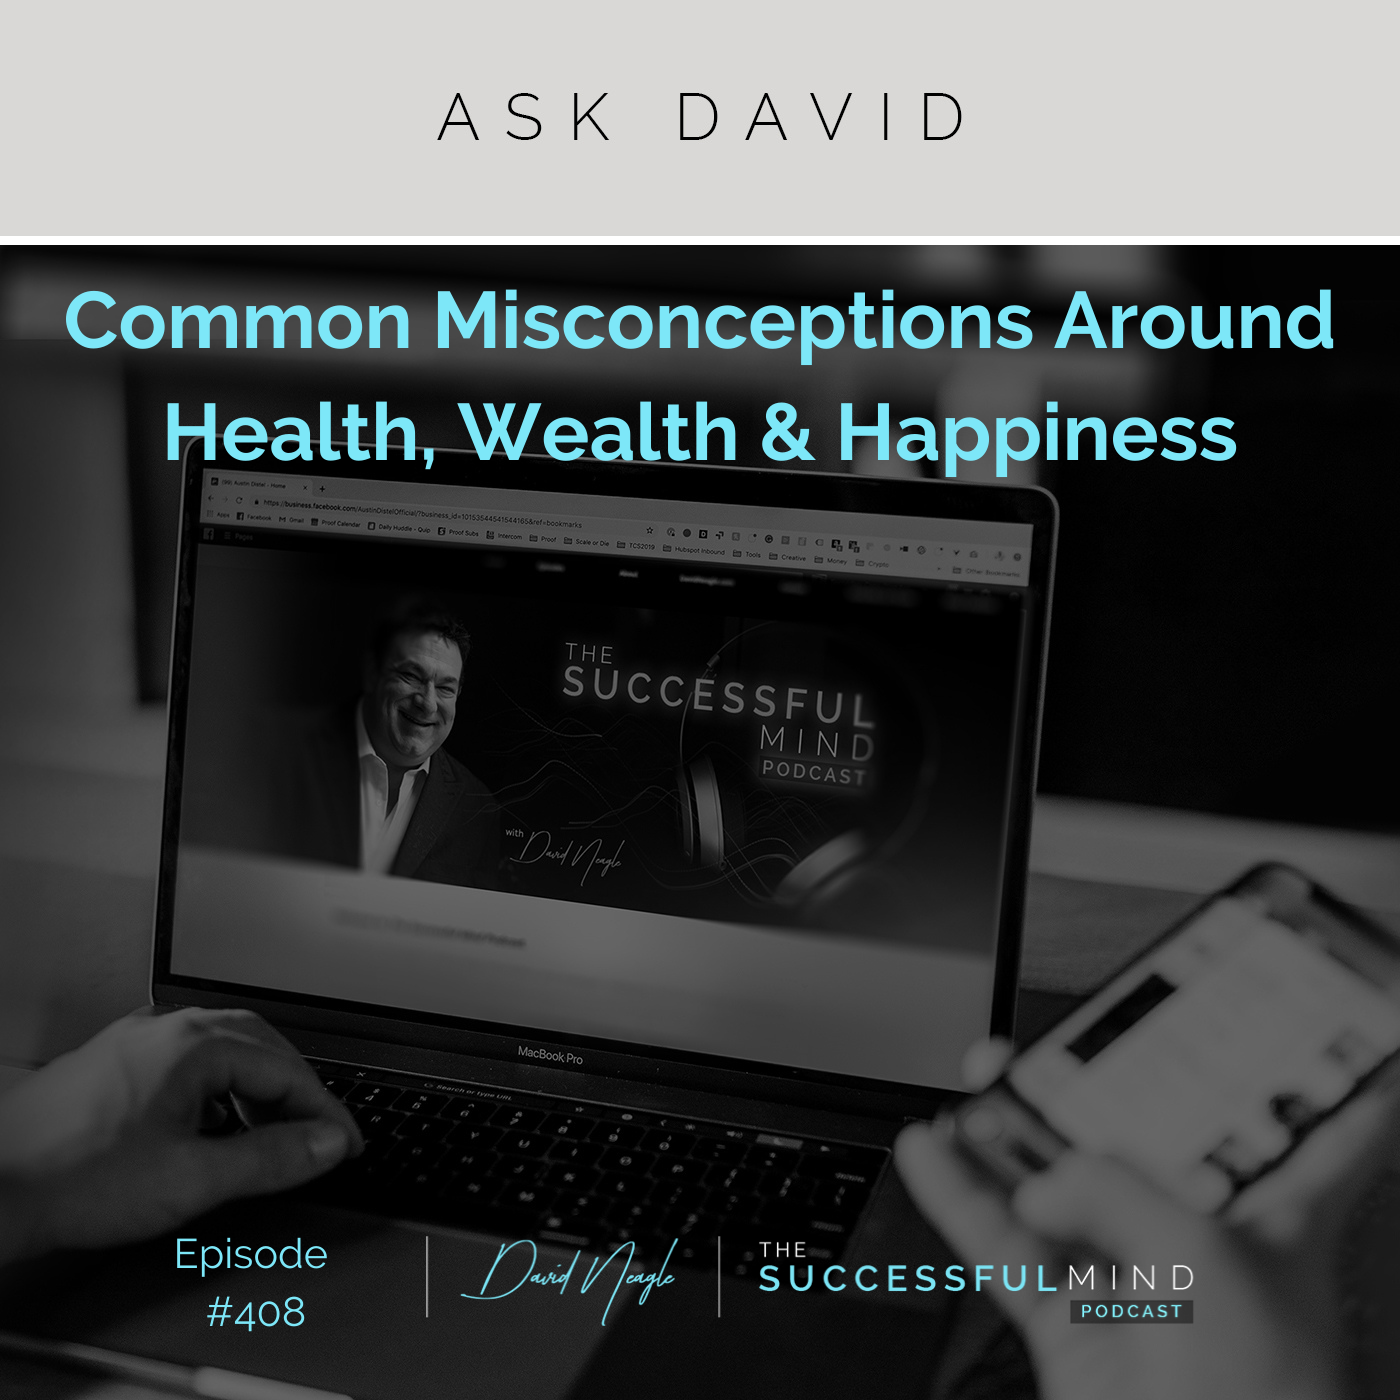 The Successful Mind Podcast – Episode 408 – Common Misconceptions Around Health, Wealth & Happiness